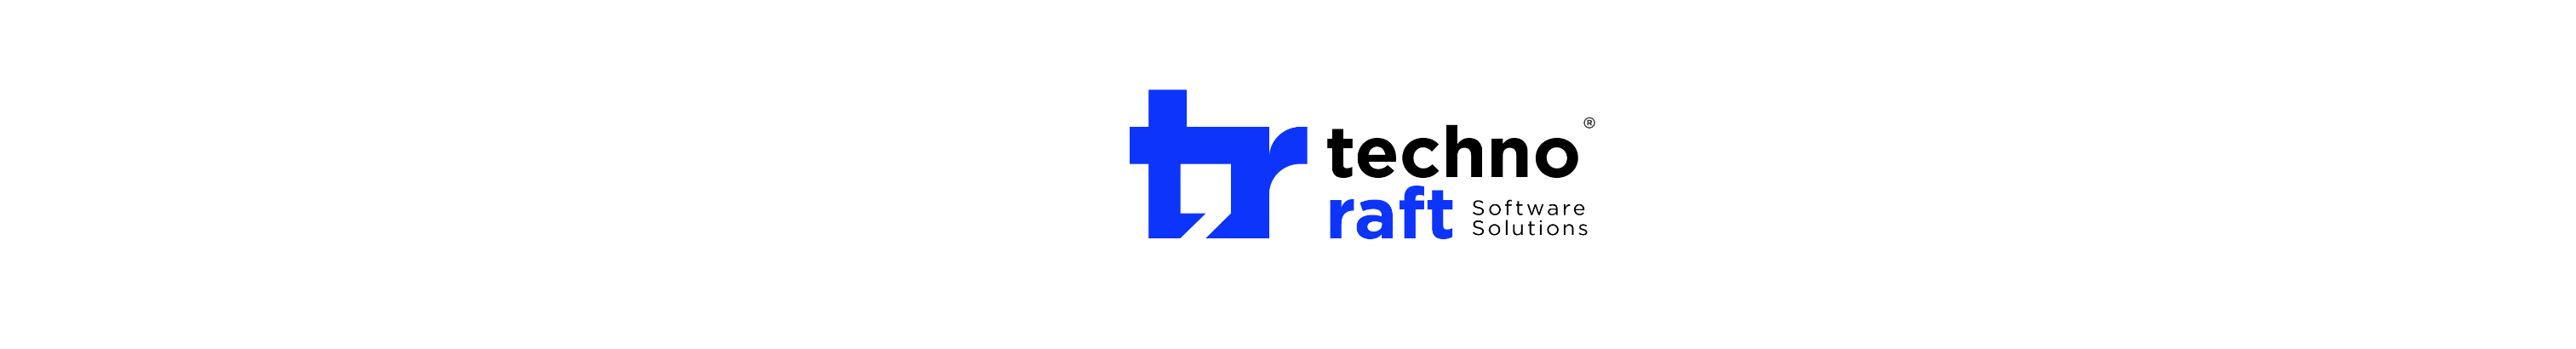 Technoraft Software Solutions's profile banner